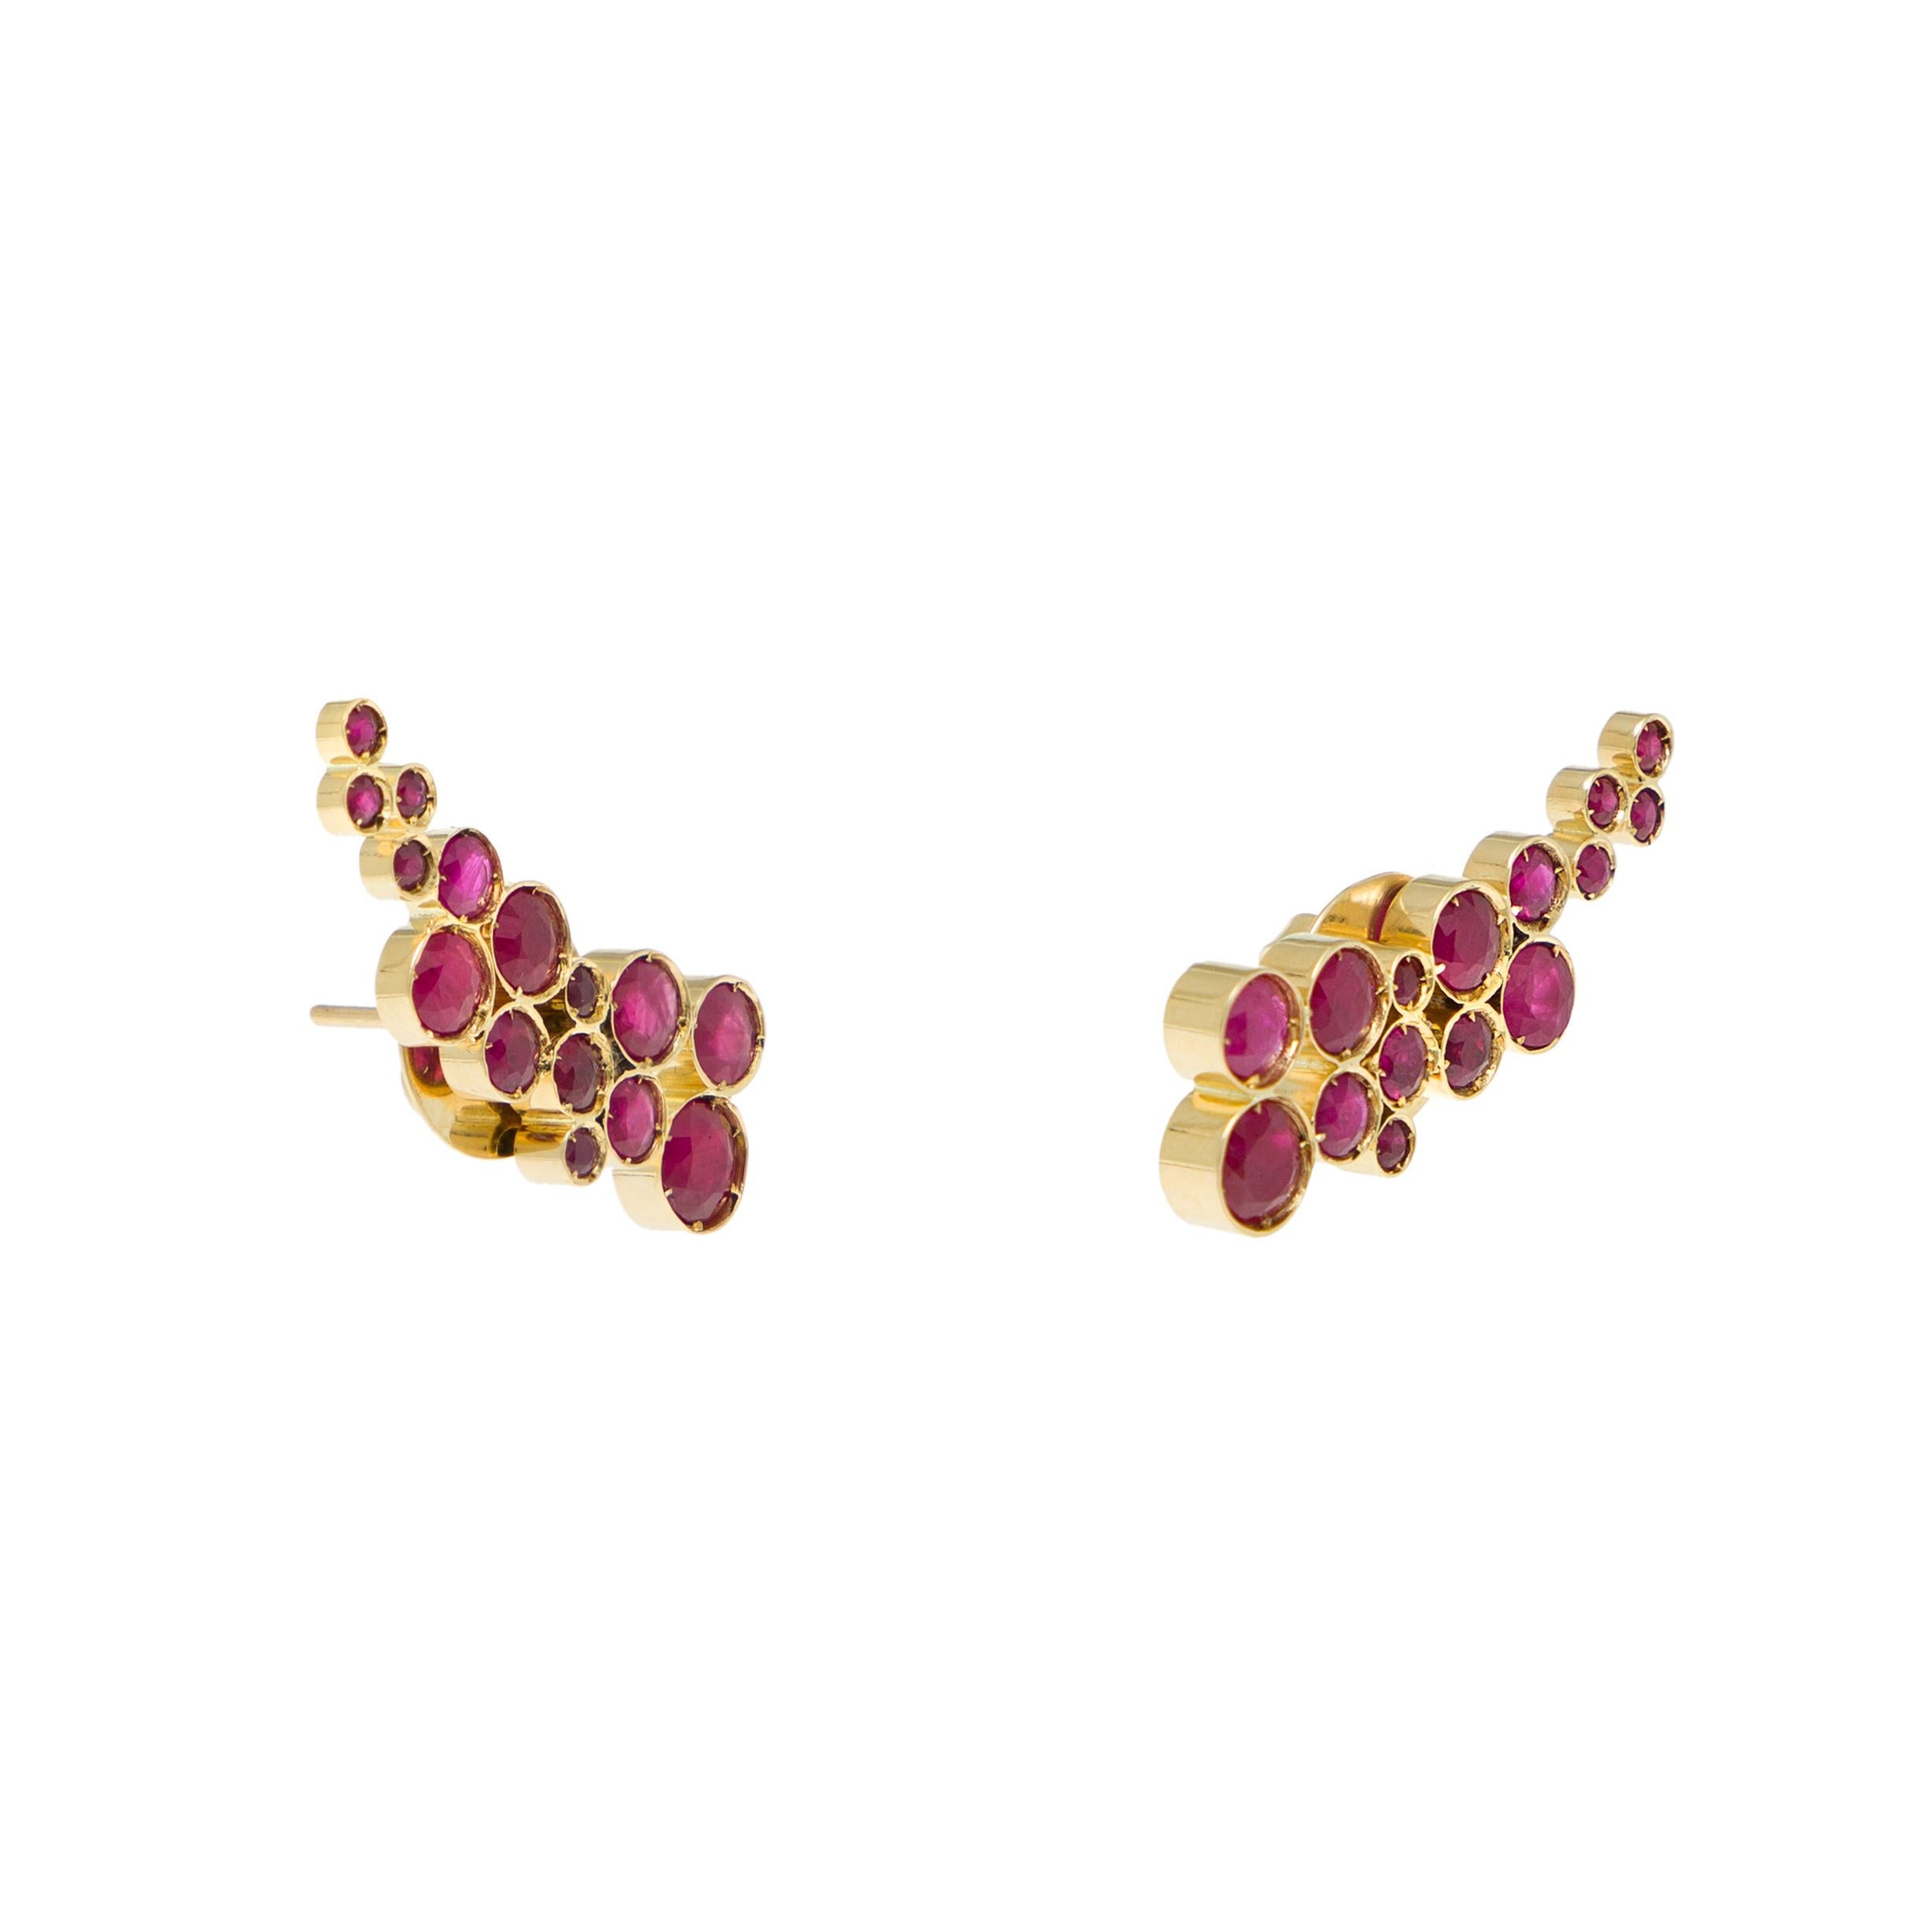 Earrings
Gold 18K 
Ruby
Handmade, polished finish and bezel setting

Many landscape architects use the sage flower to highlight and accentuate other adjacent flowers.  We believe that this is what motivated Van Gogh to surround his bouquet with